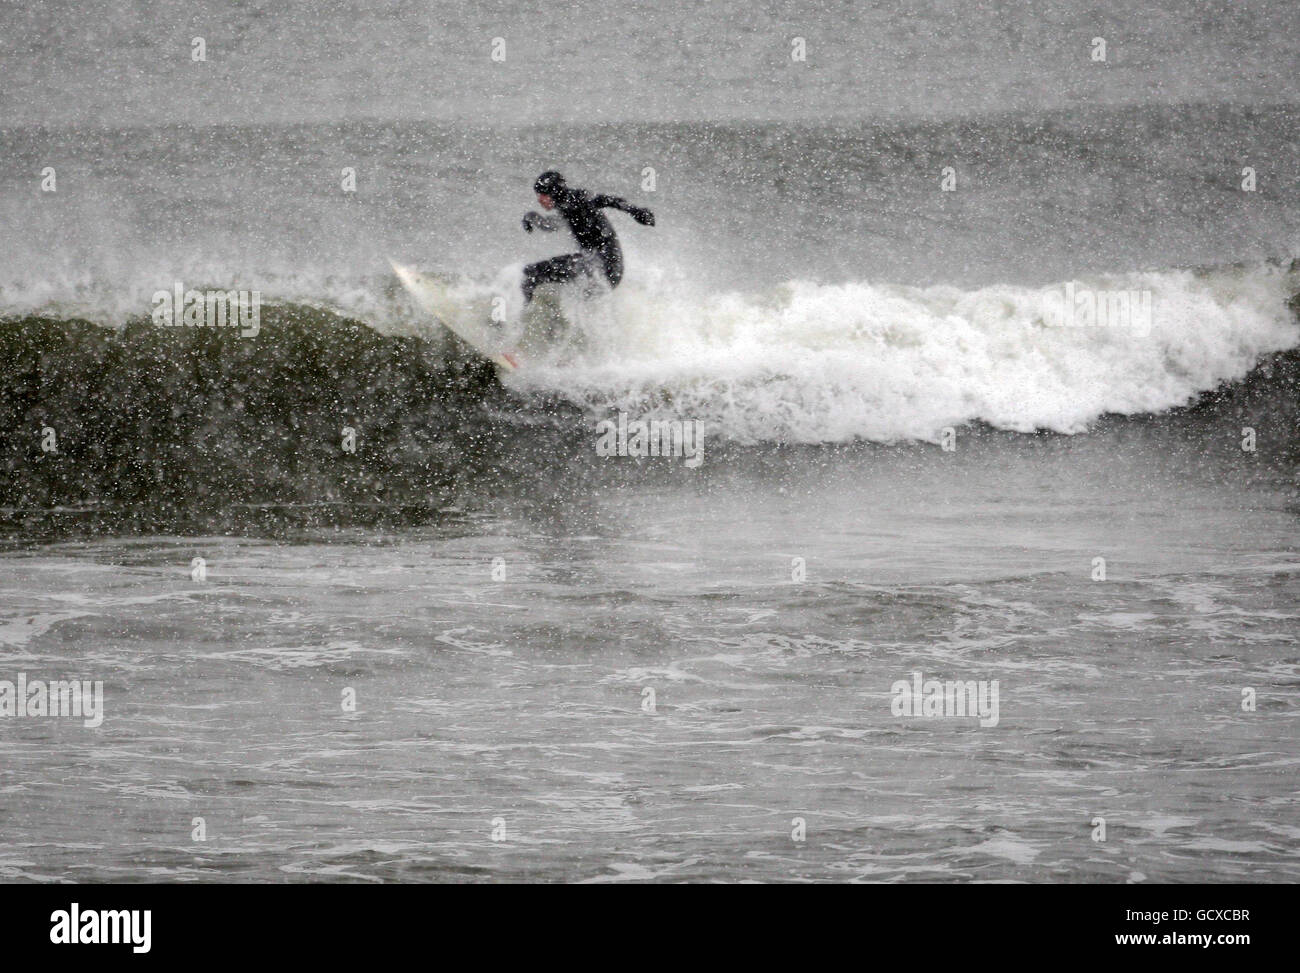 A surfer braves the freezing weather conditions in pursuit of his sport at Aberdeen beach, Scotland, as more snowfalls are forecast for much of the UK. Stock Photo